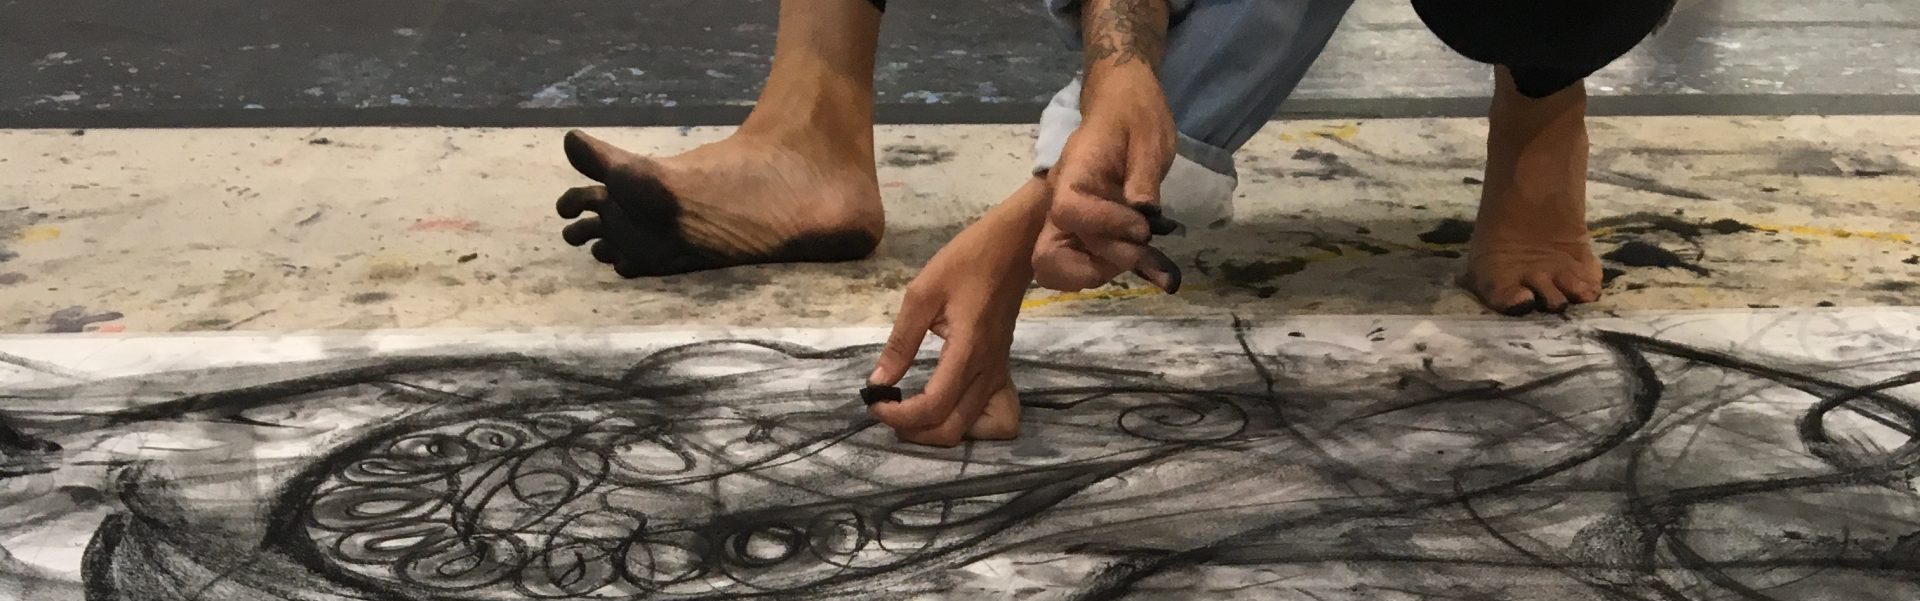 hands and feet of a person working on a large drawing on the floor